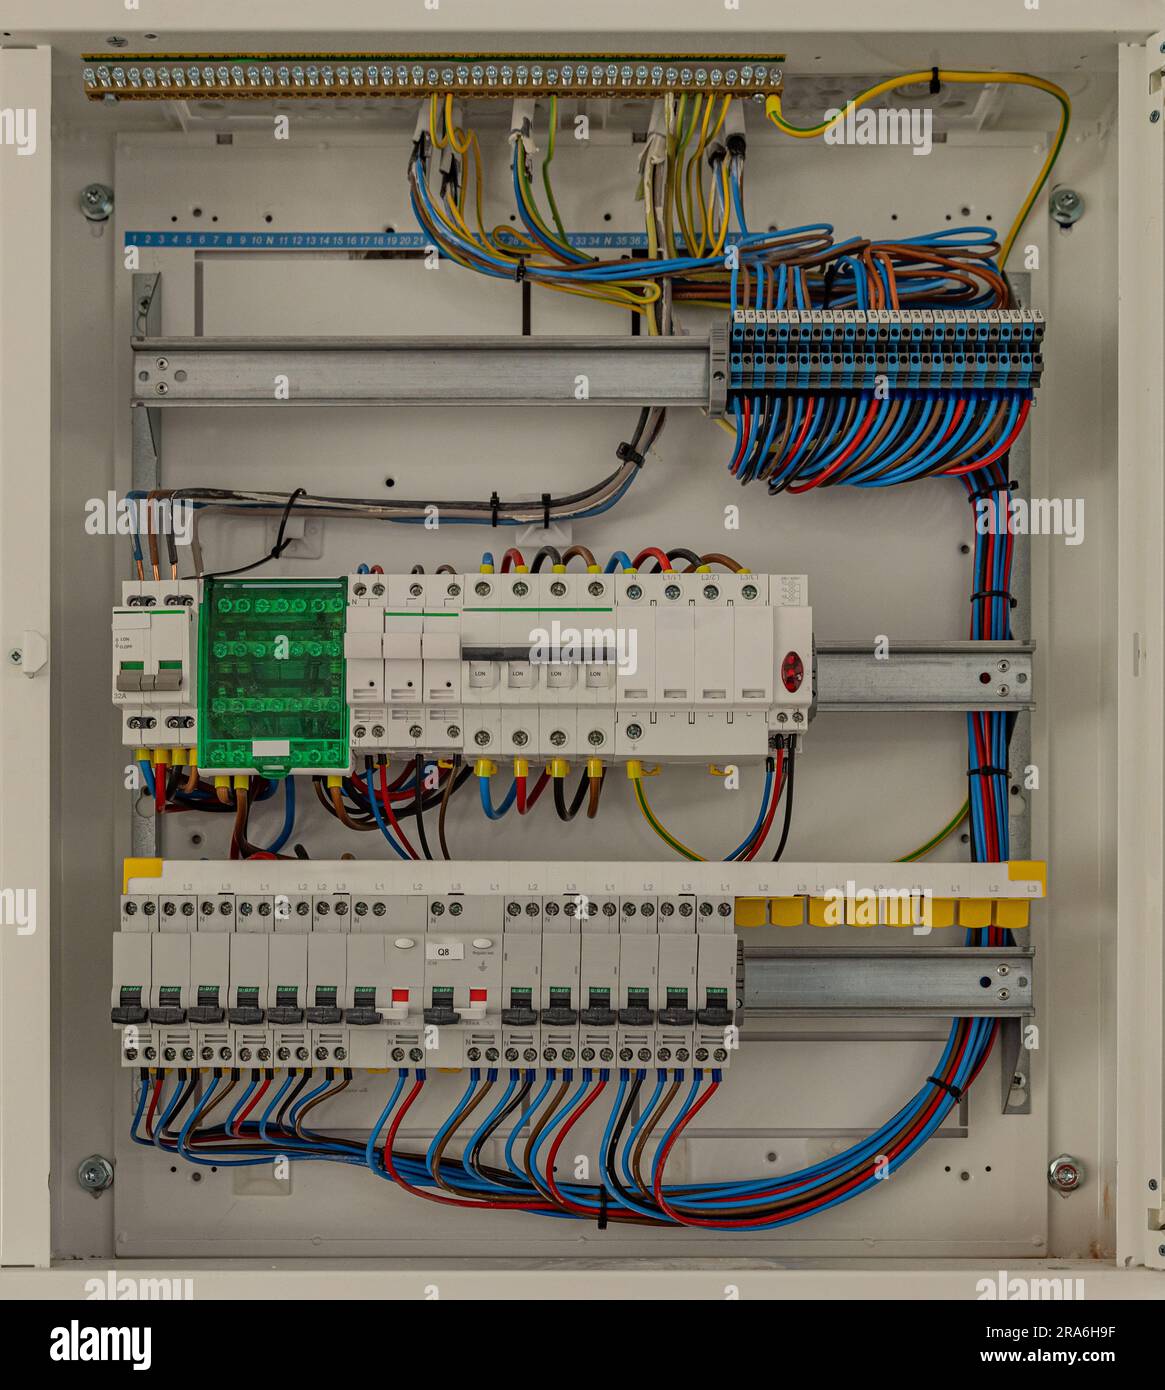 Electrical panel with multi-colored wires. Voltage distributor with circuit breakers. Stock Photo